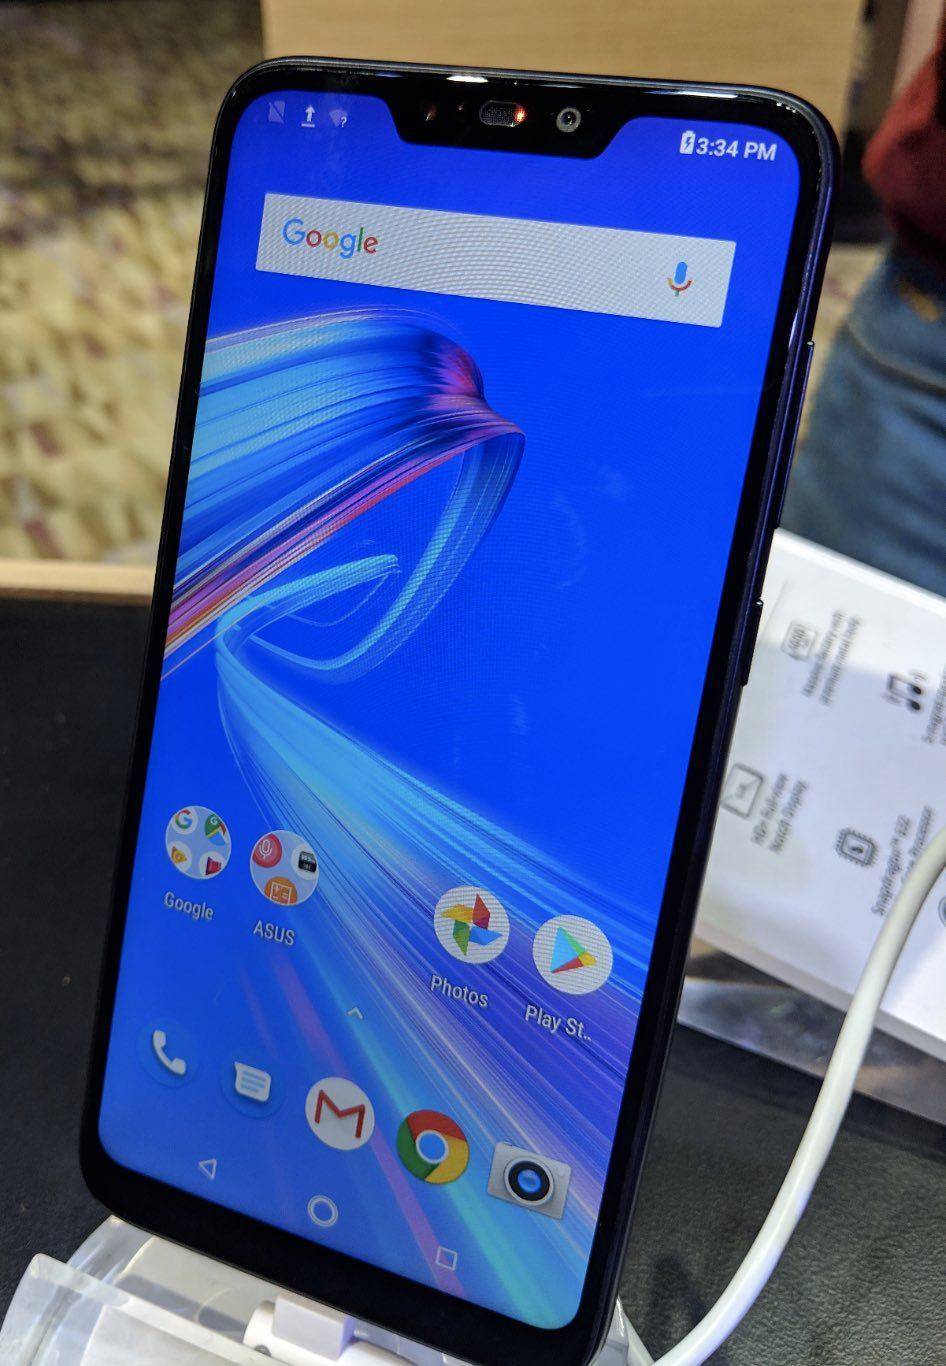 How to install android 11 on asus zenfone max pro m1 - droidwin